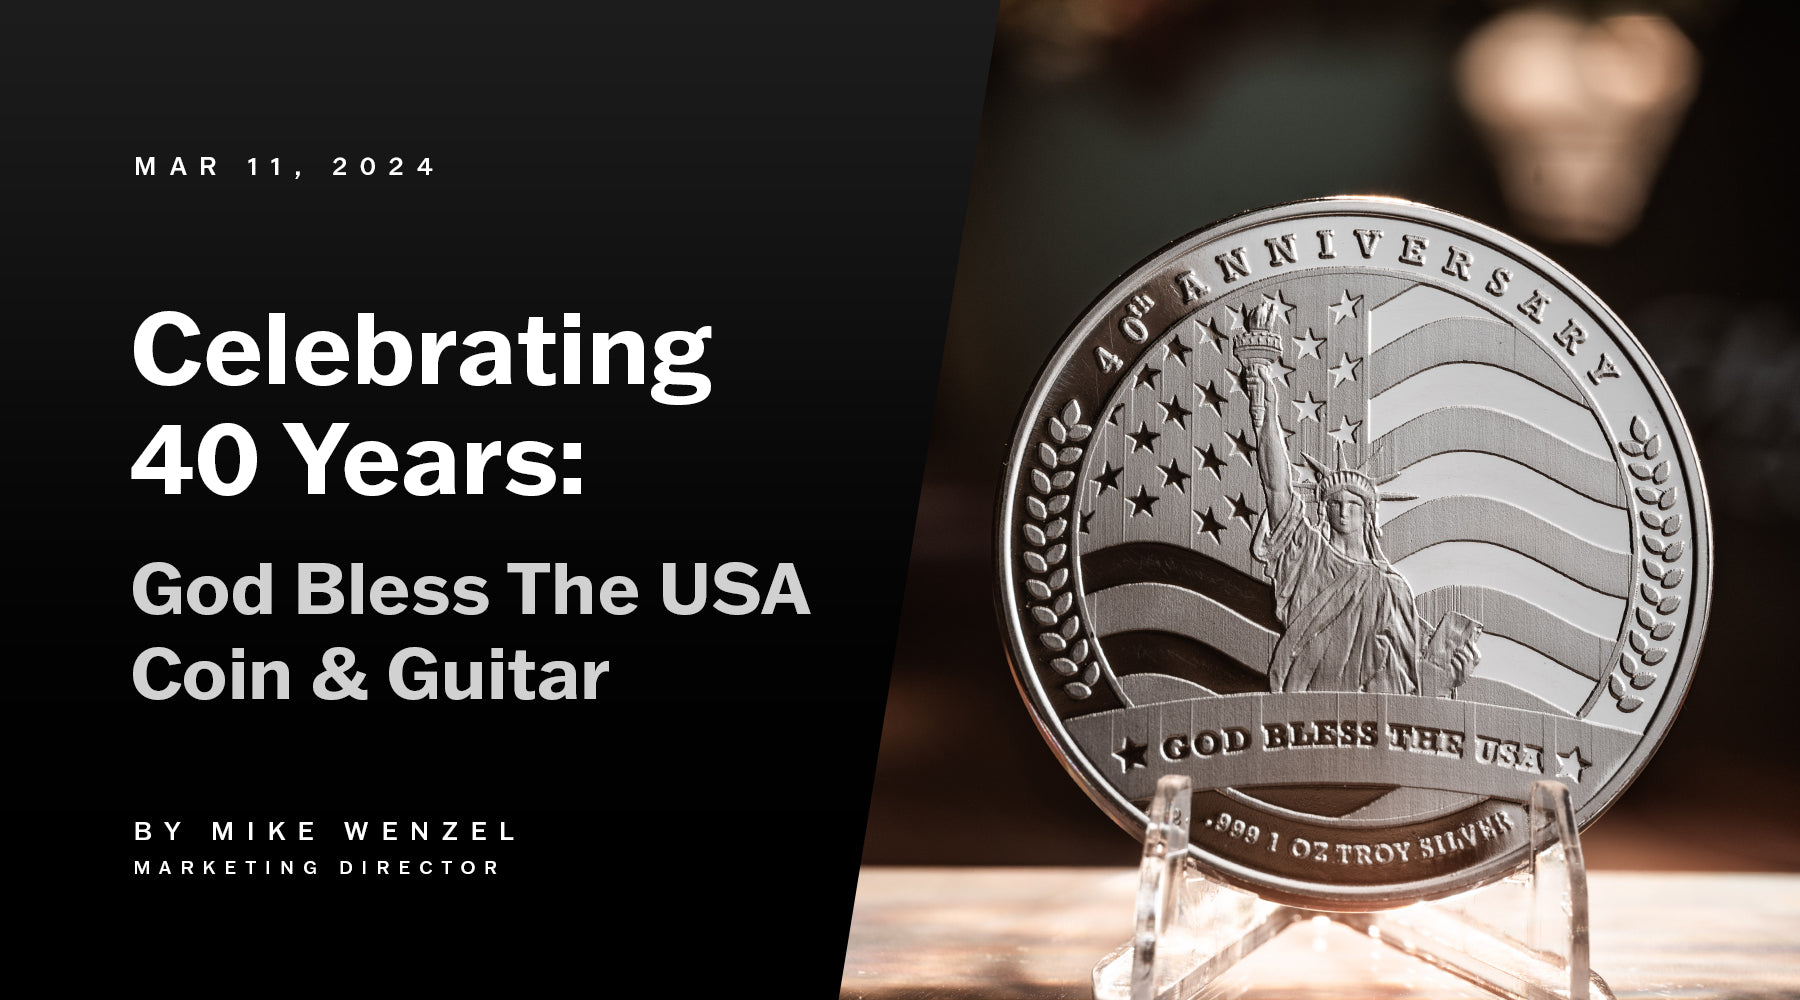 Celebrating 40 Years of God Bless The USA: The "God Bless The USA" Coin & The Lee Greenwood Autographed Guitar